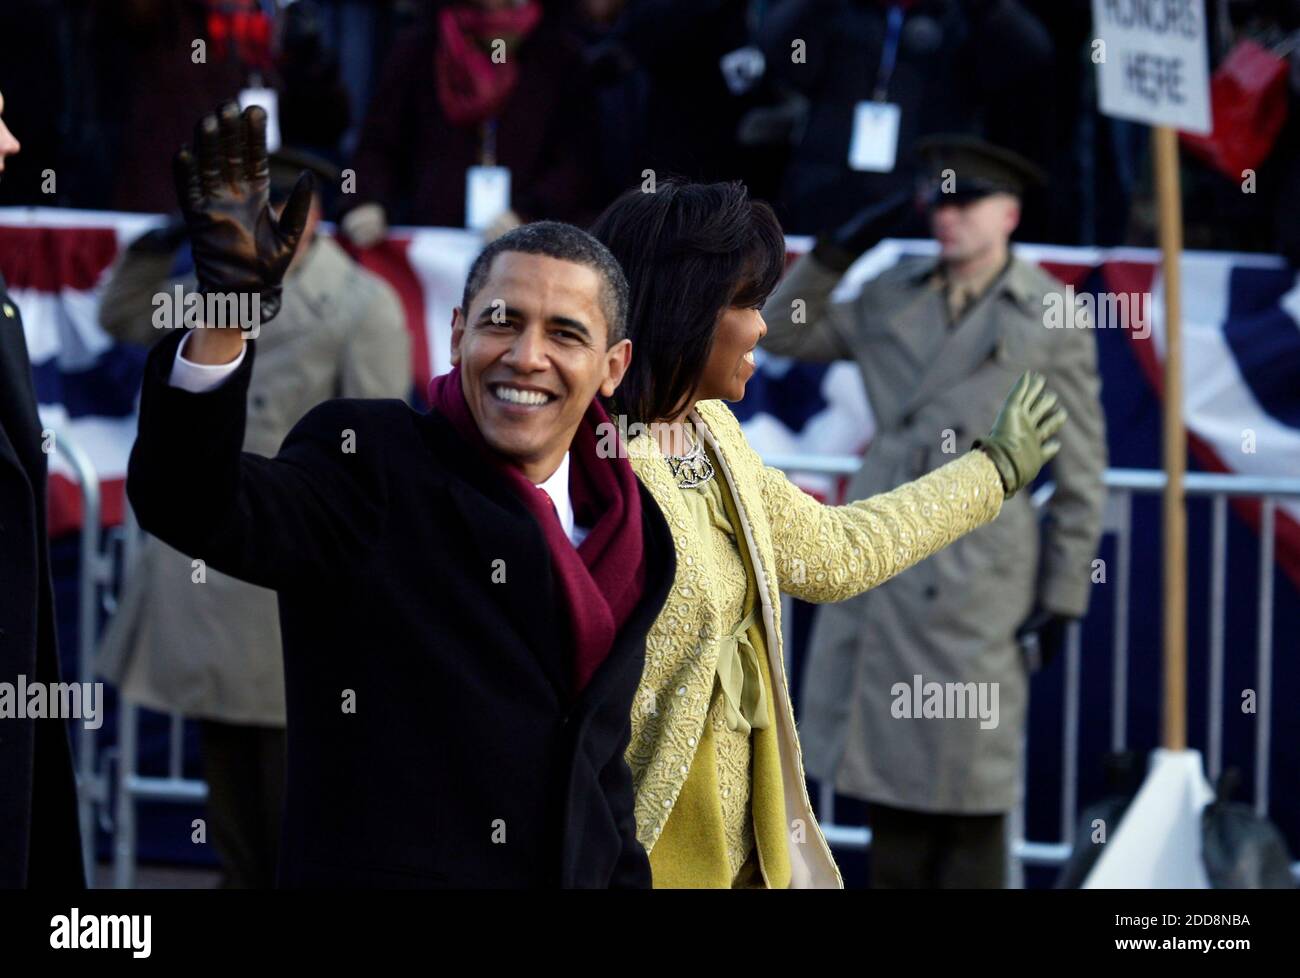 NO FILM, NO VIDEO, NO TV, NO DOCUMENTARY - President Barack Obama and wife Michelle walk along the parade route after he was sworn in as the 44th US President in Washington, D.C., USA, on January 20, 2009. Photo by George Bridges/MCT/ABACAPRESS.COM Stock Photo